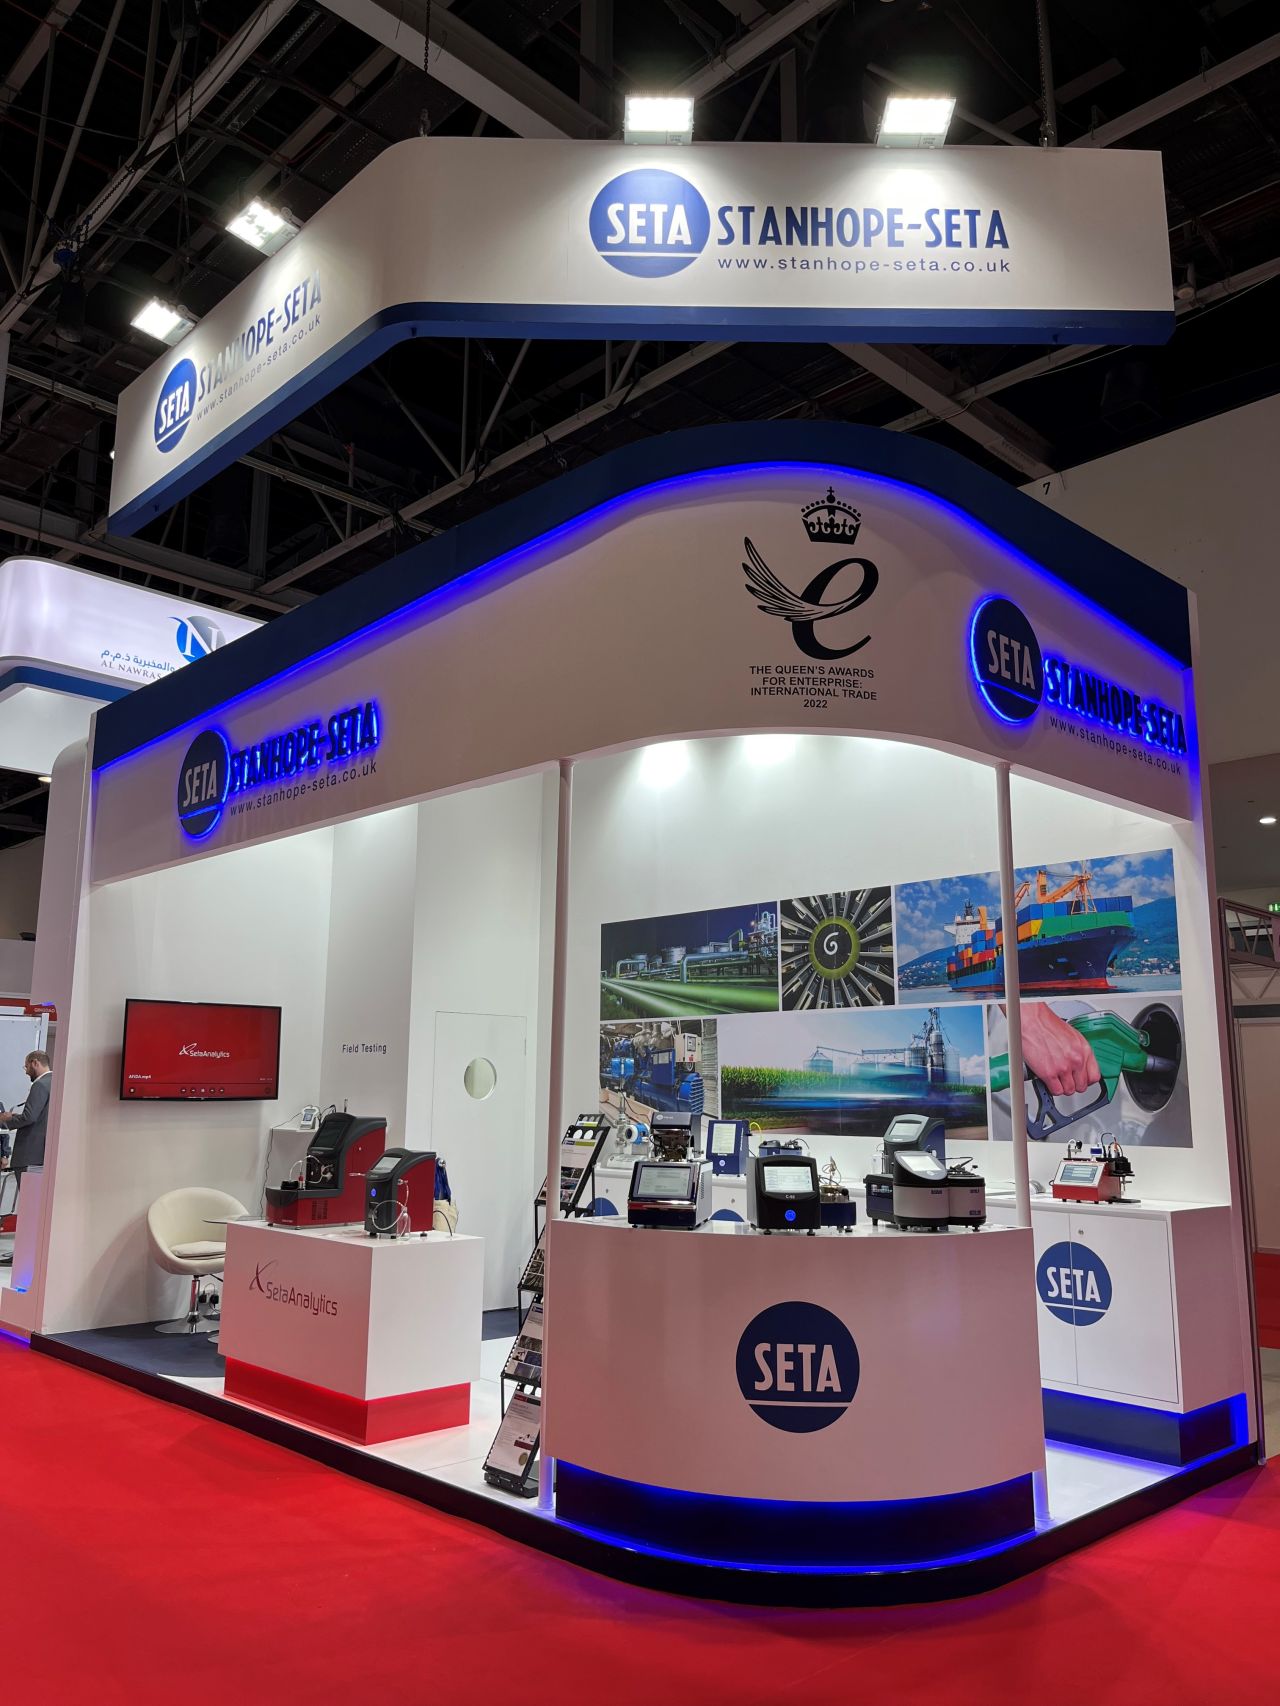 Stanhope-seta is participating in ArabLab Live 22. Are you excited to see new range of instruments?